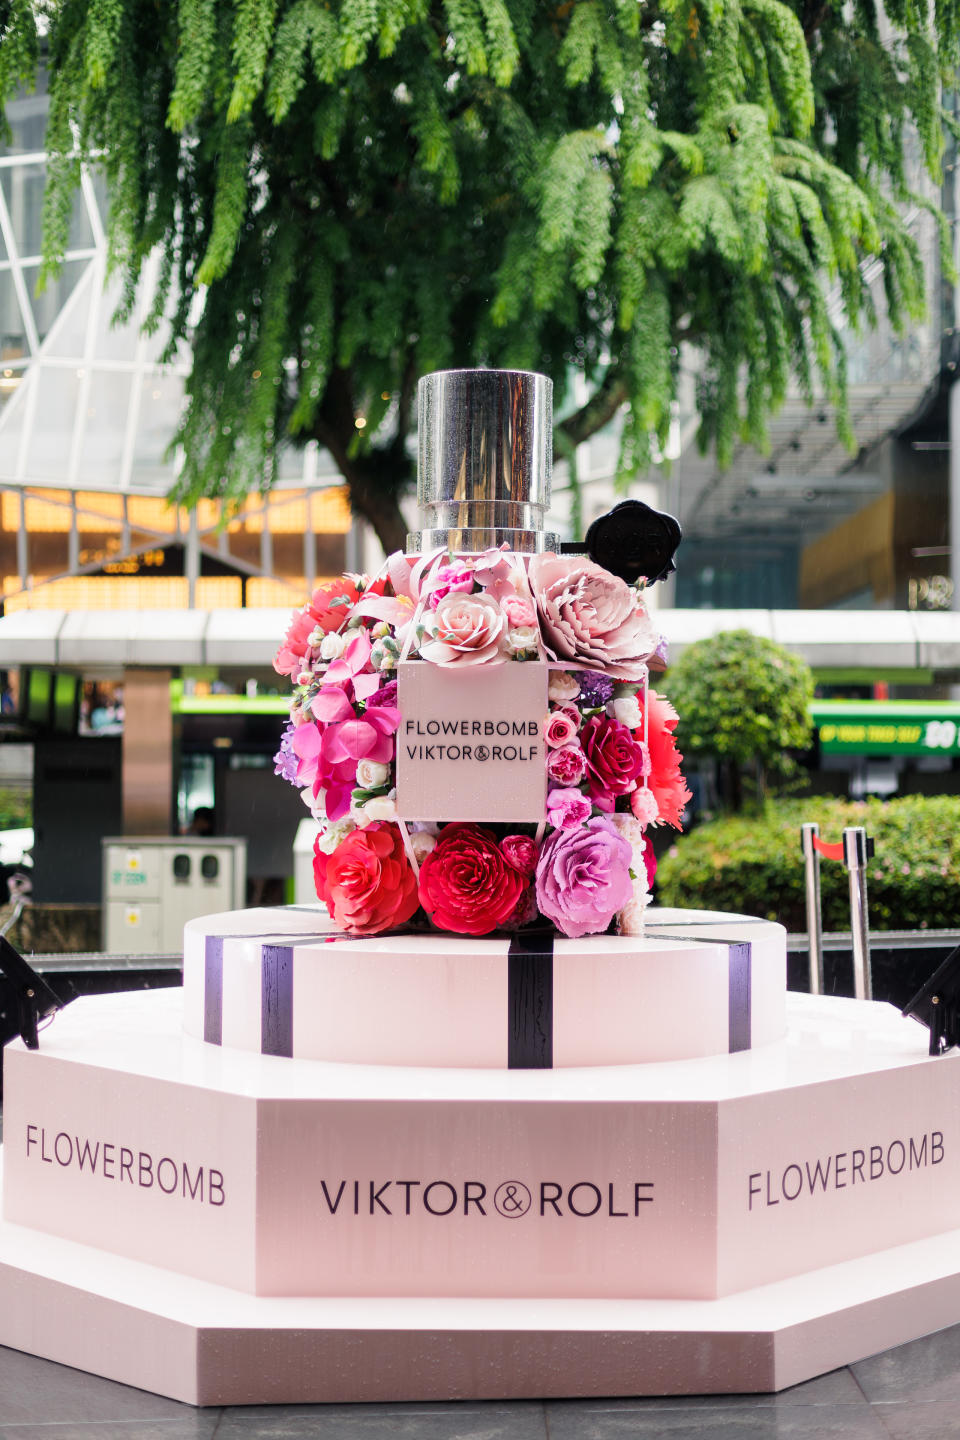 Indulge in fragrances and ice-cream at Viktor & Rolf's pop-up outside Tangs Plaza, Orchard. PHOTO: Viktor & Rolf